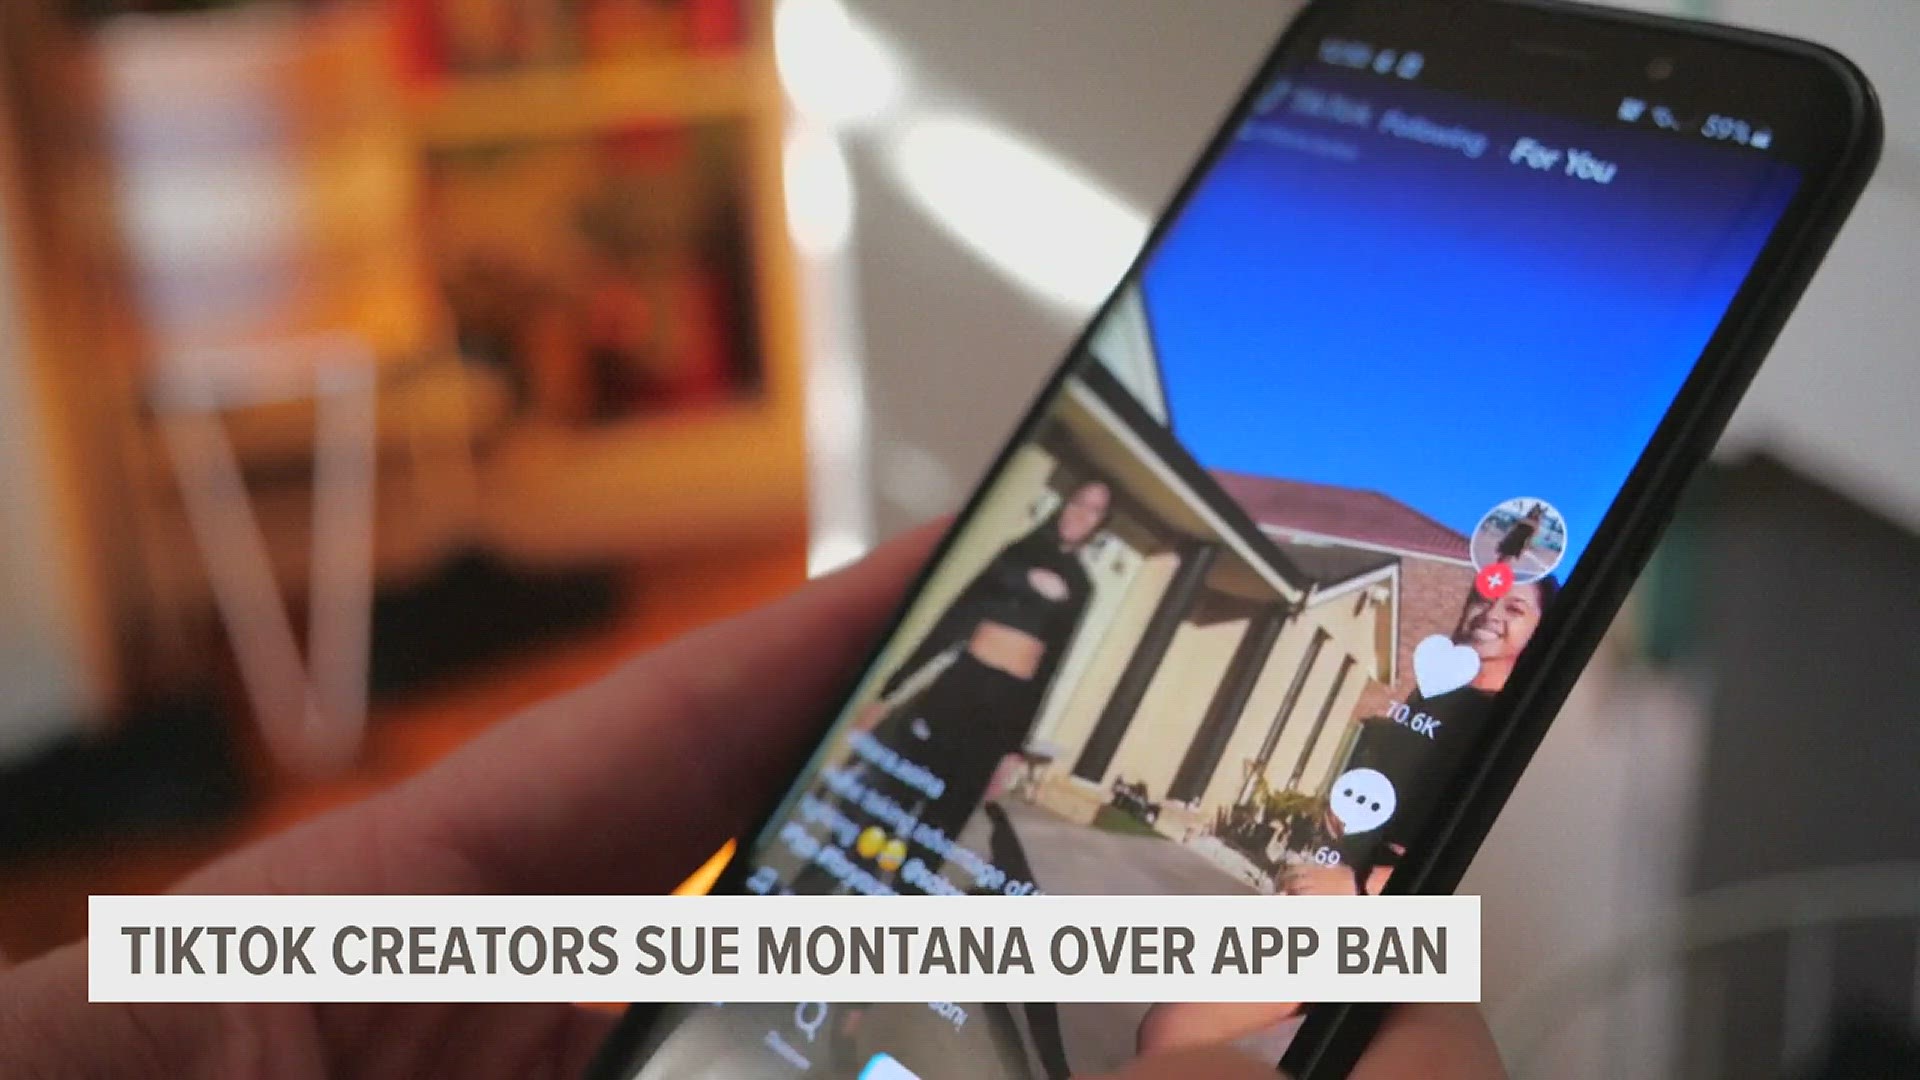 The five content creators say the ban on the app violates their free speech and argue the state doesn't have any authority over matters of national security.